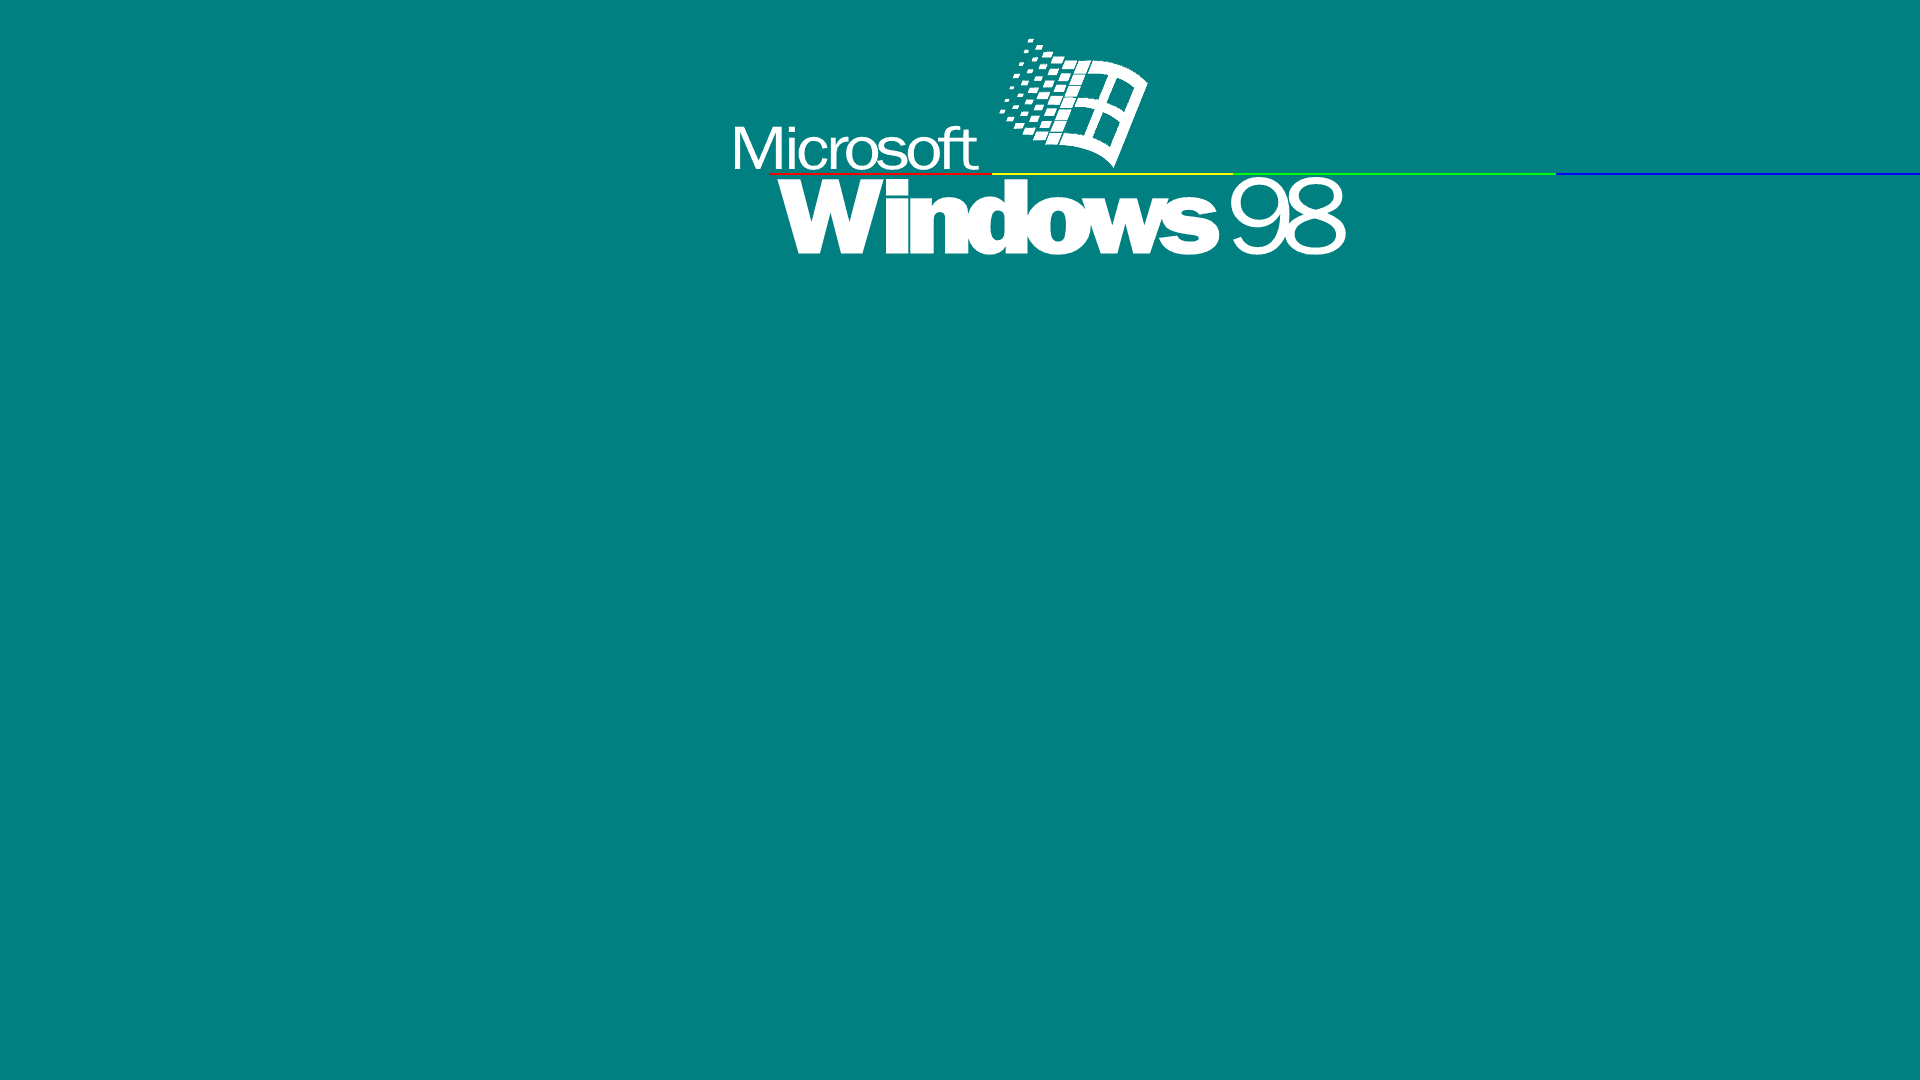 Windows Wallpapers 1366x768 Group (98+)